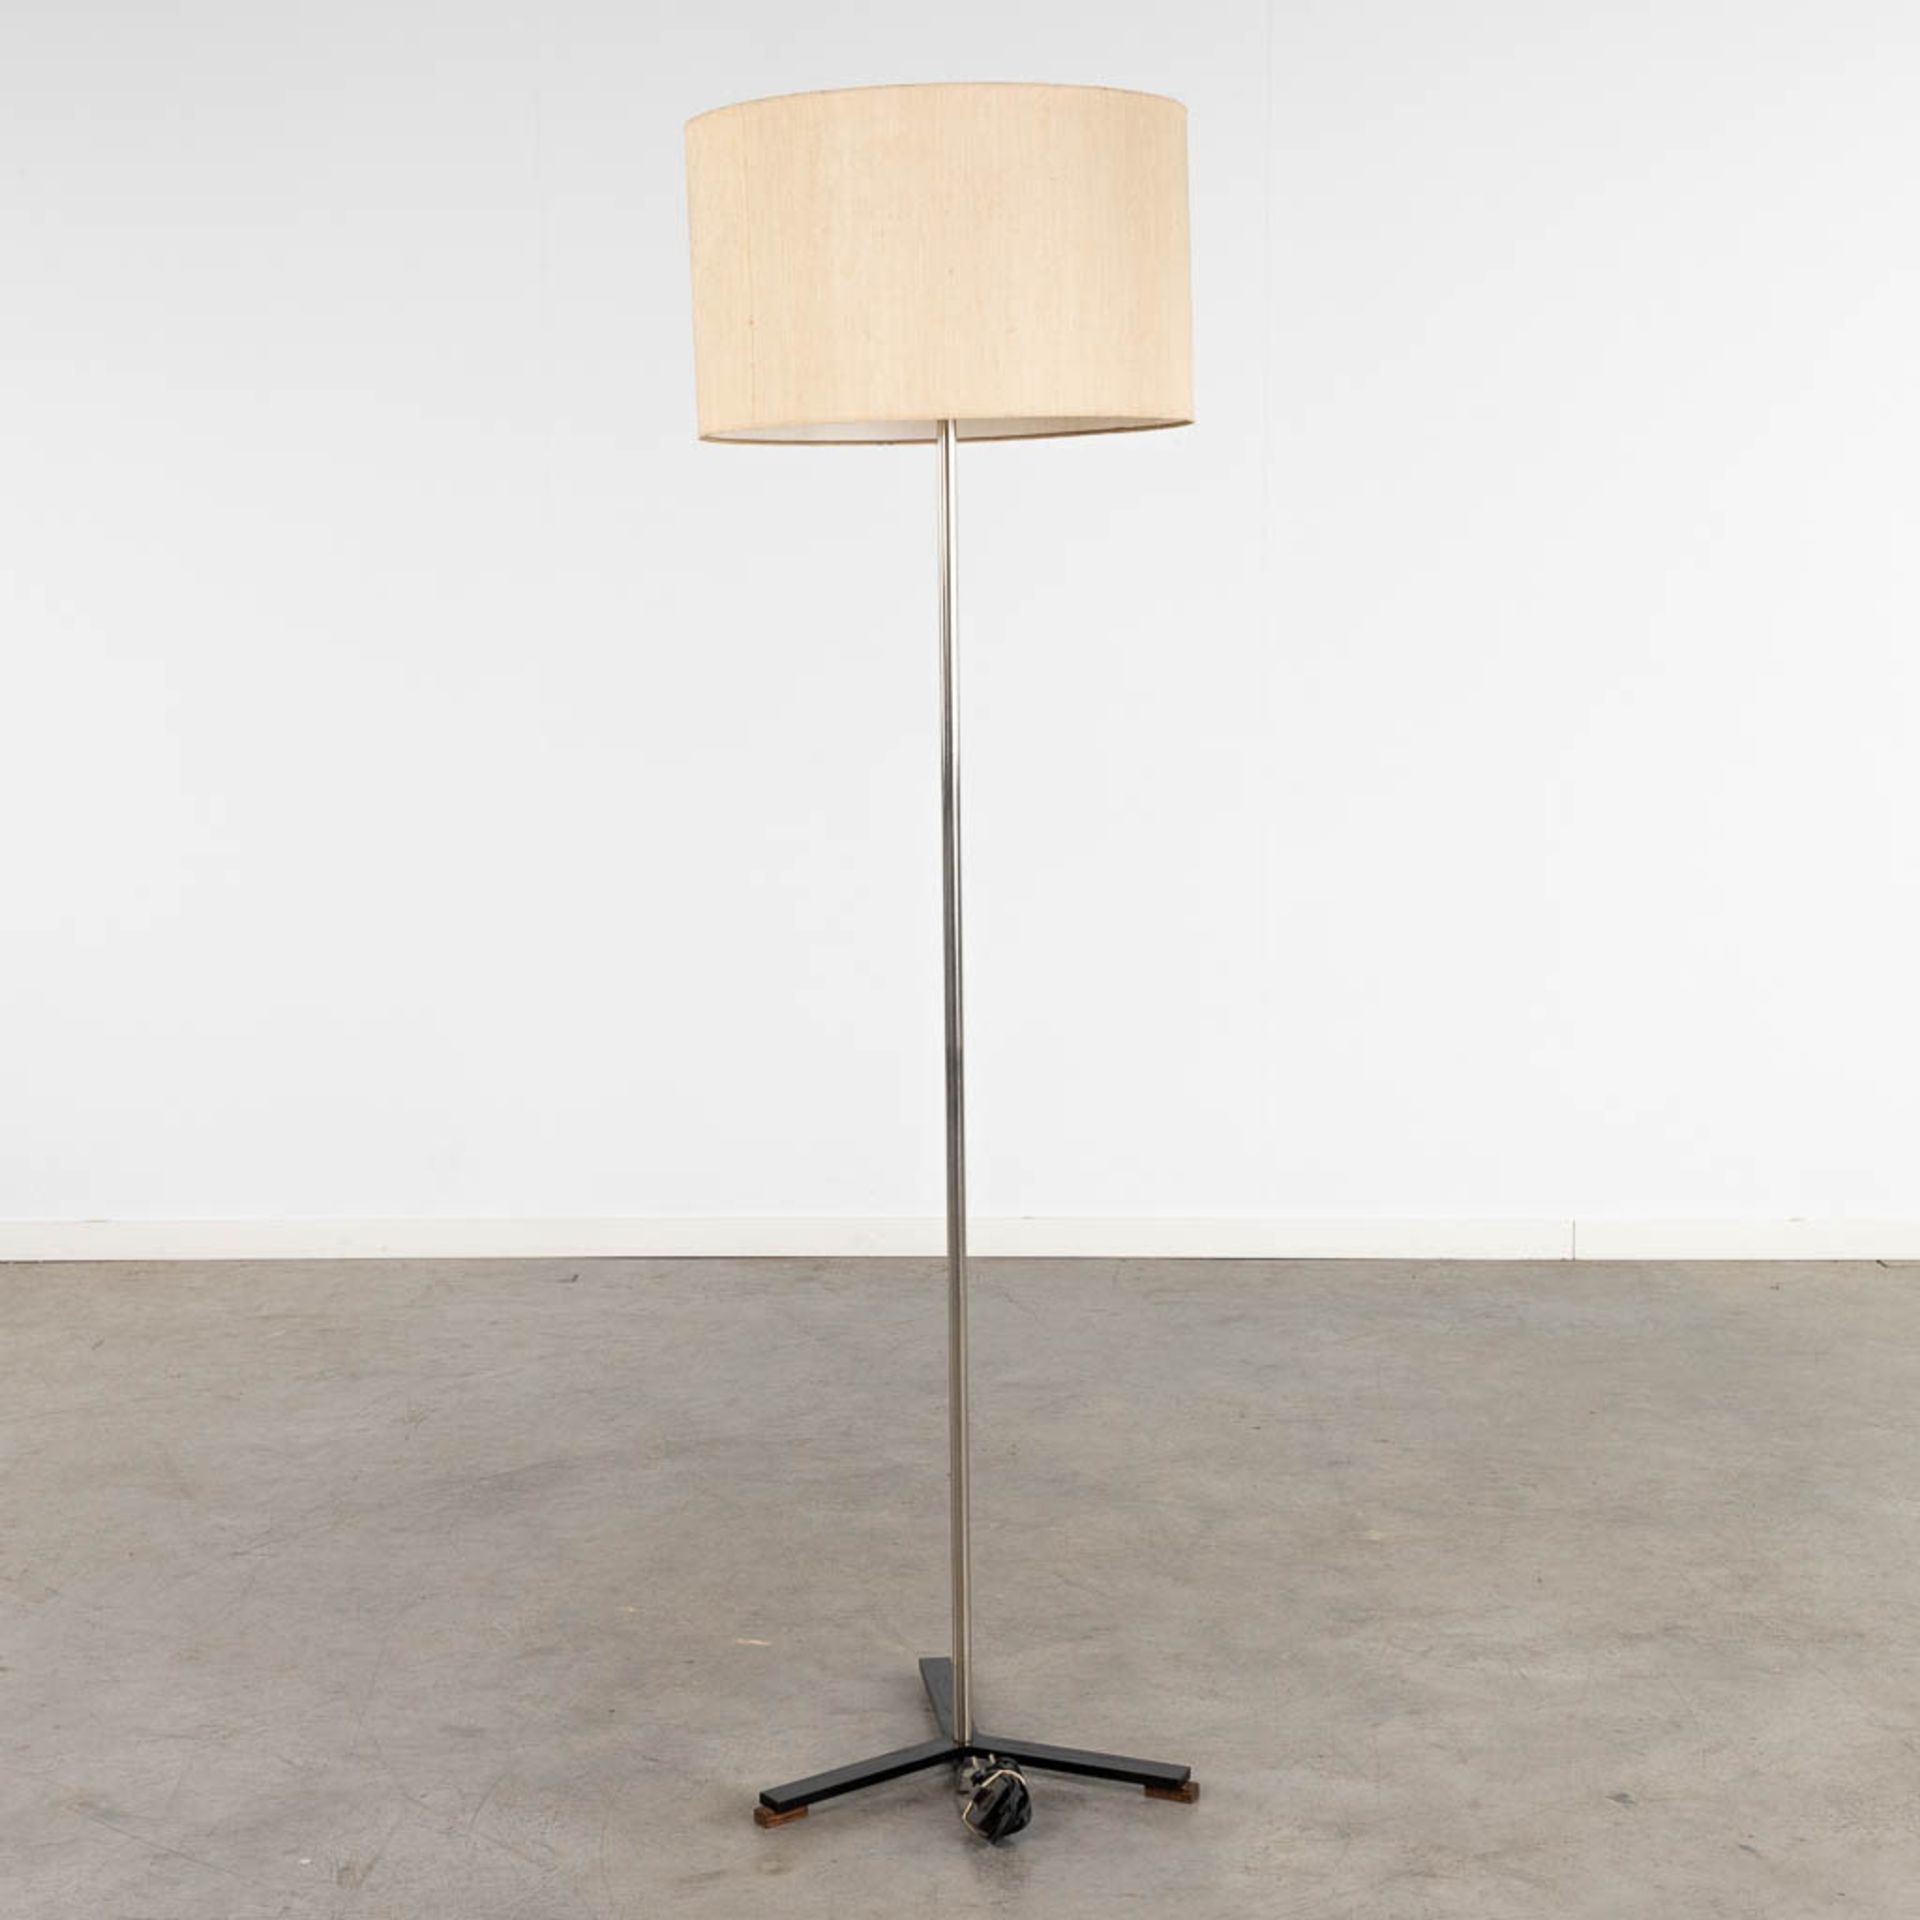 A mid-century floor lamp, chromed metal, metal and wood. (L:40 x W:40 x H:165 cm) - Image 4 of 8